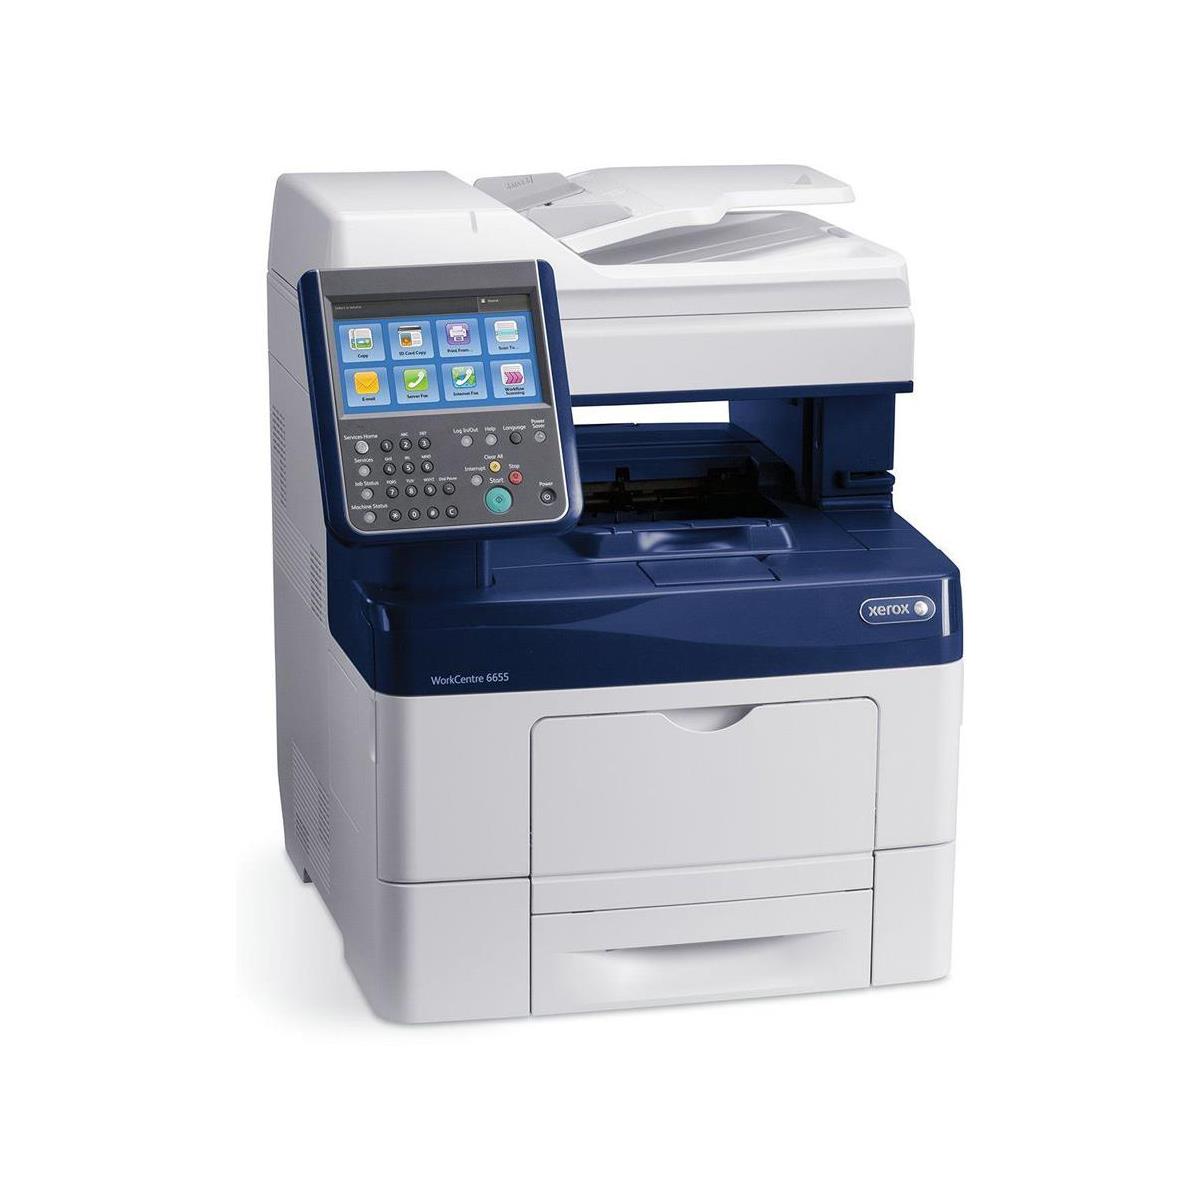 Xerox WorkCentre 6655/X Color Multifunction Laser Printer -  6655I/X